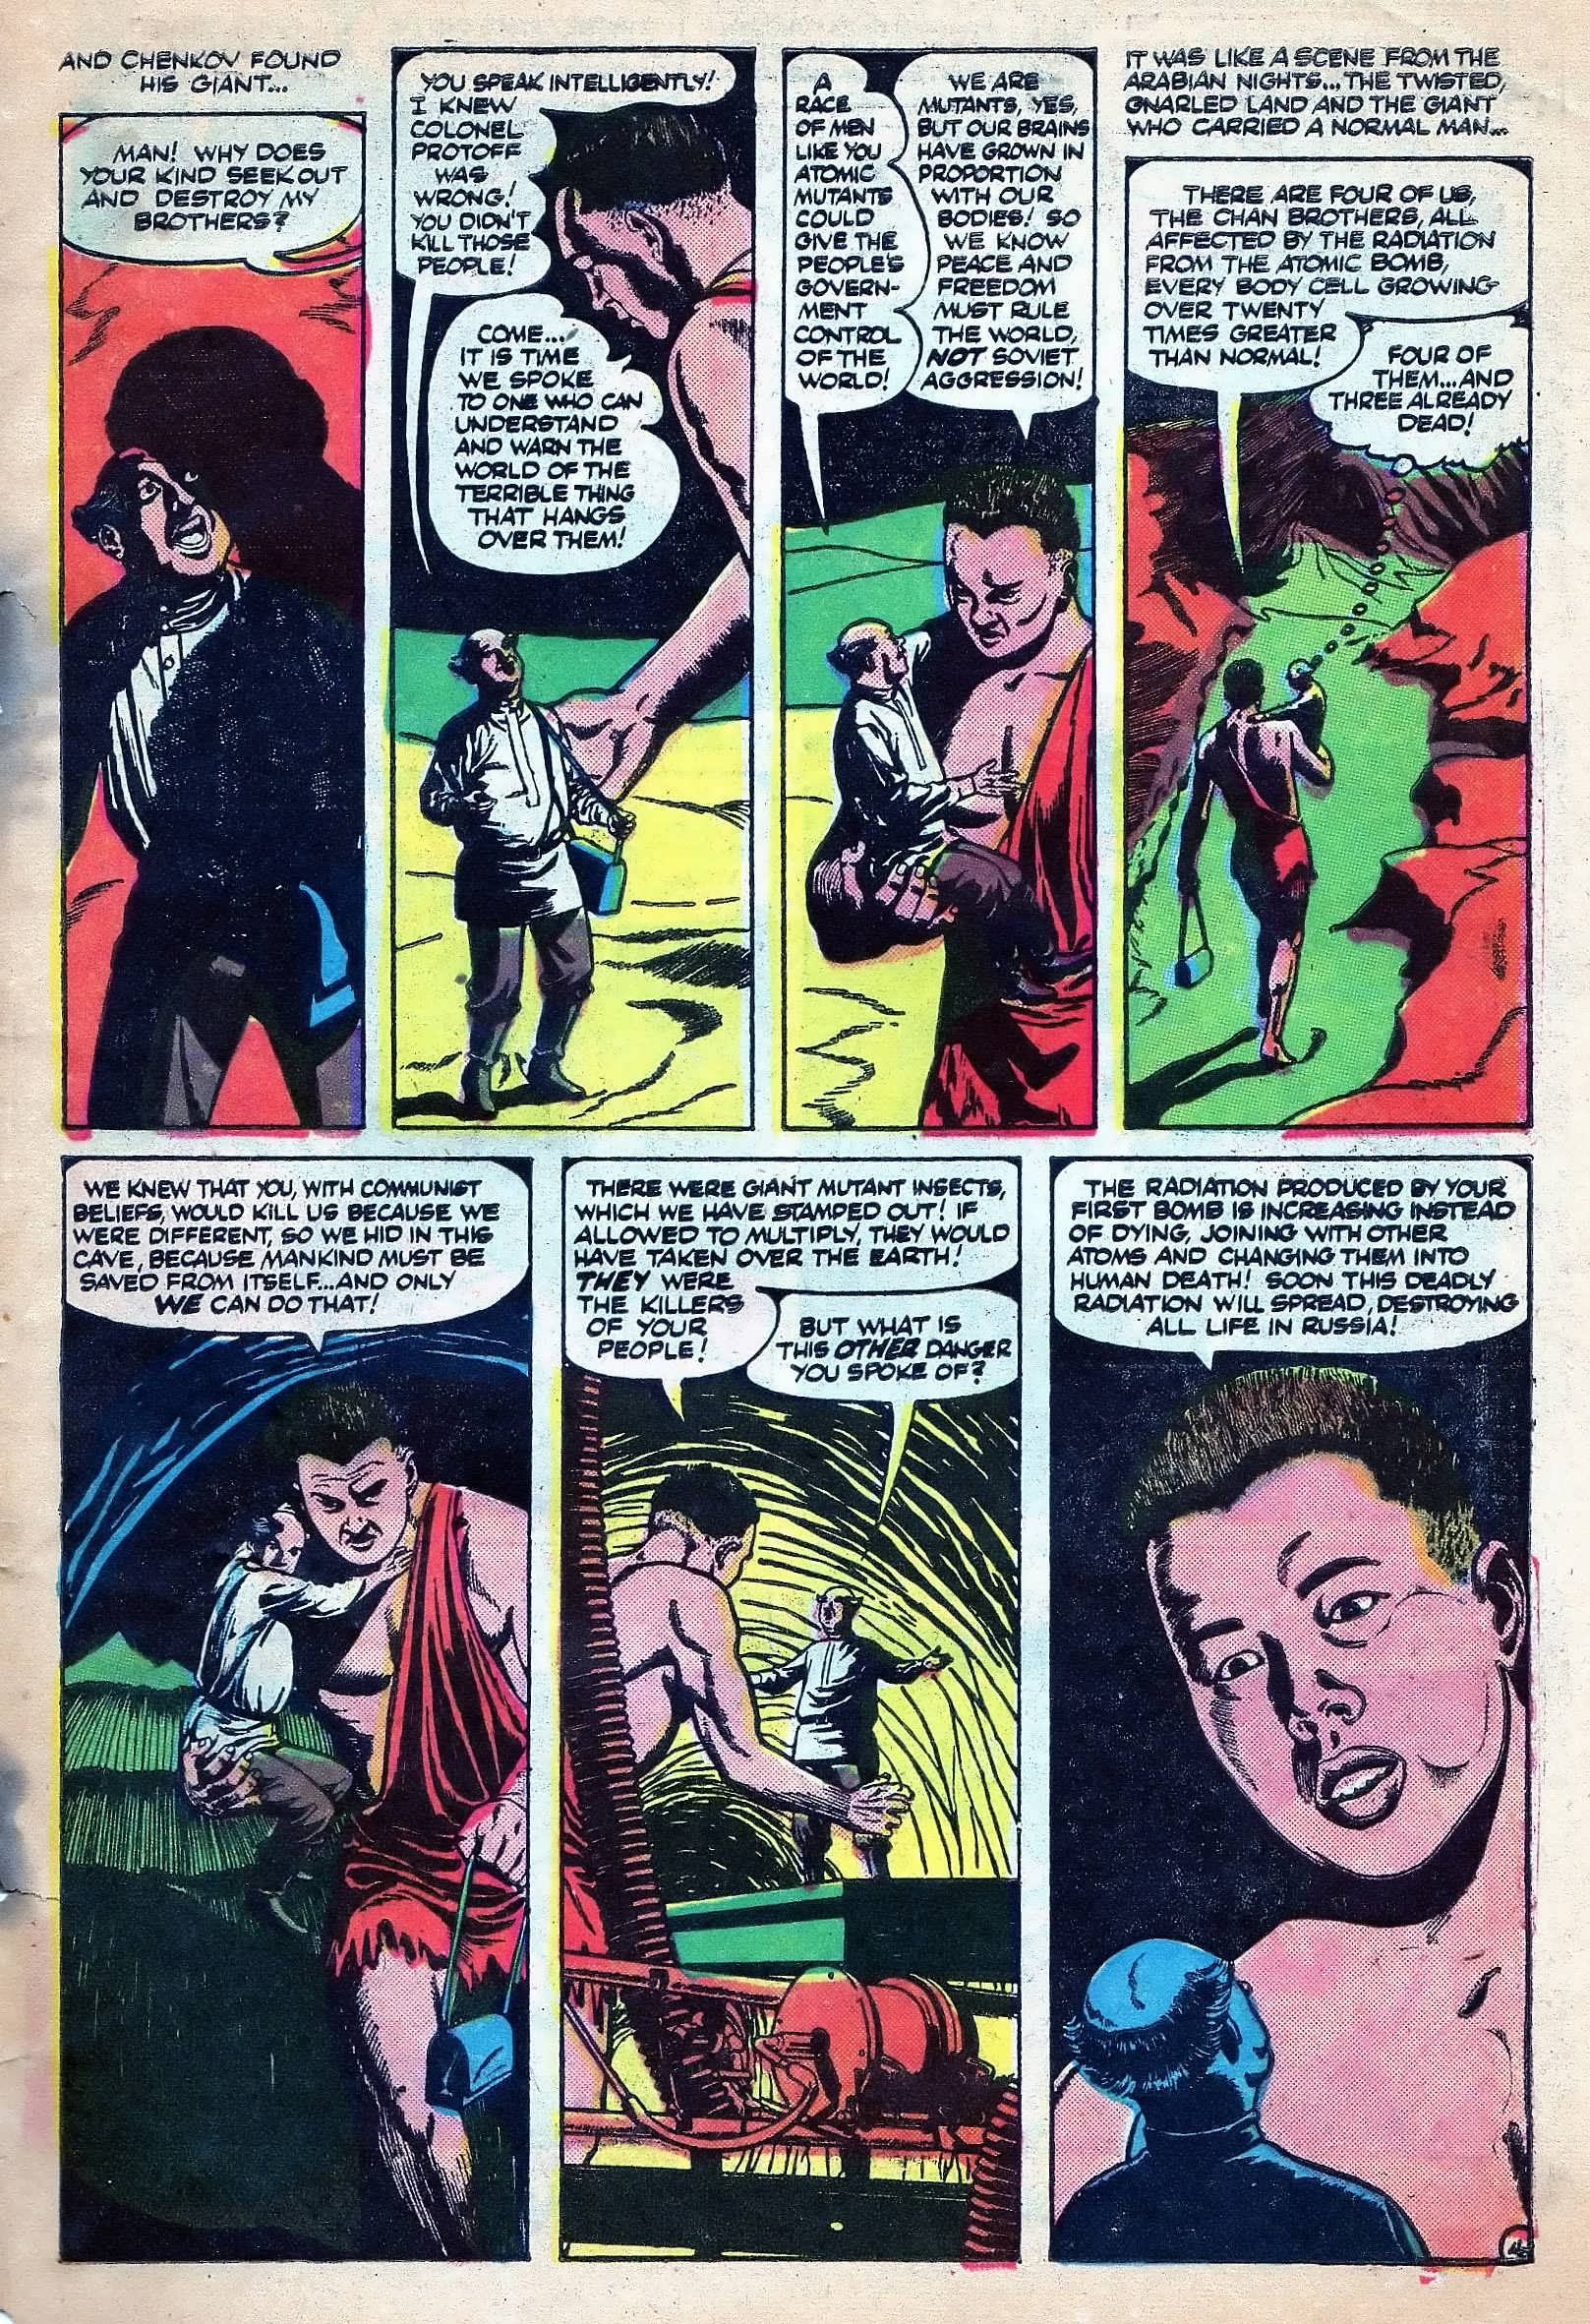 Marvel Tales (1949) 130 Page 30